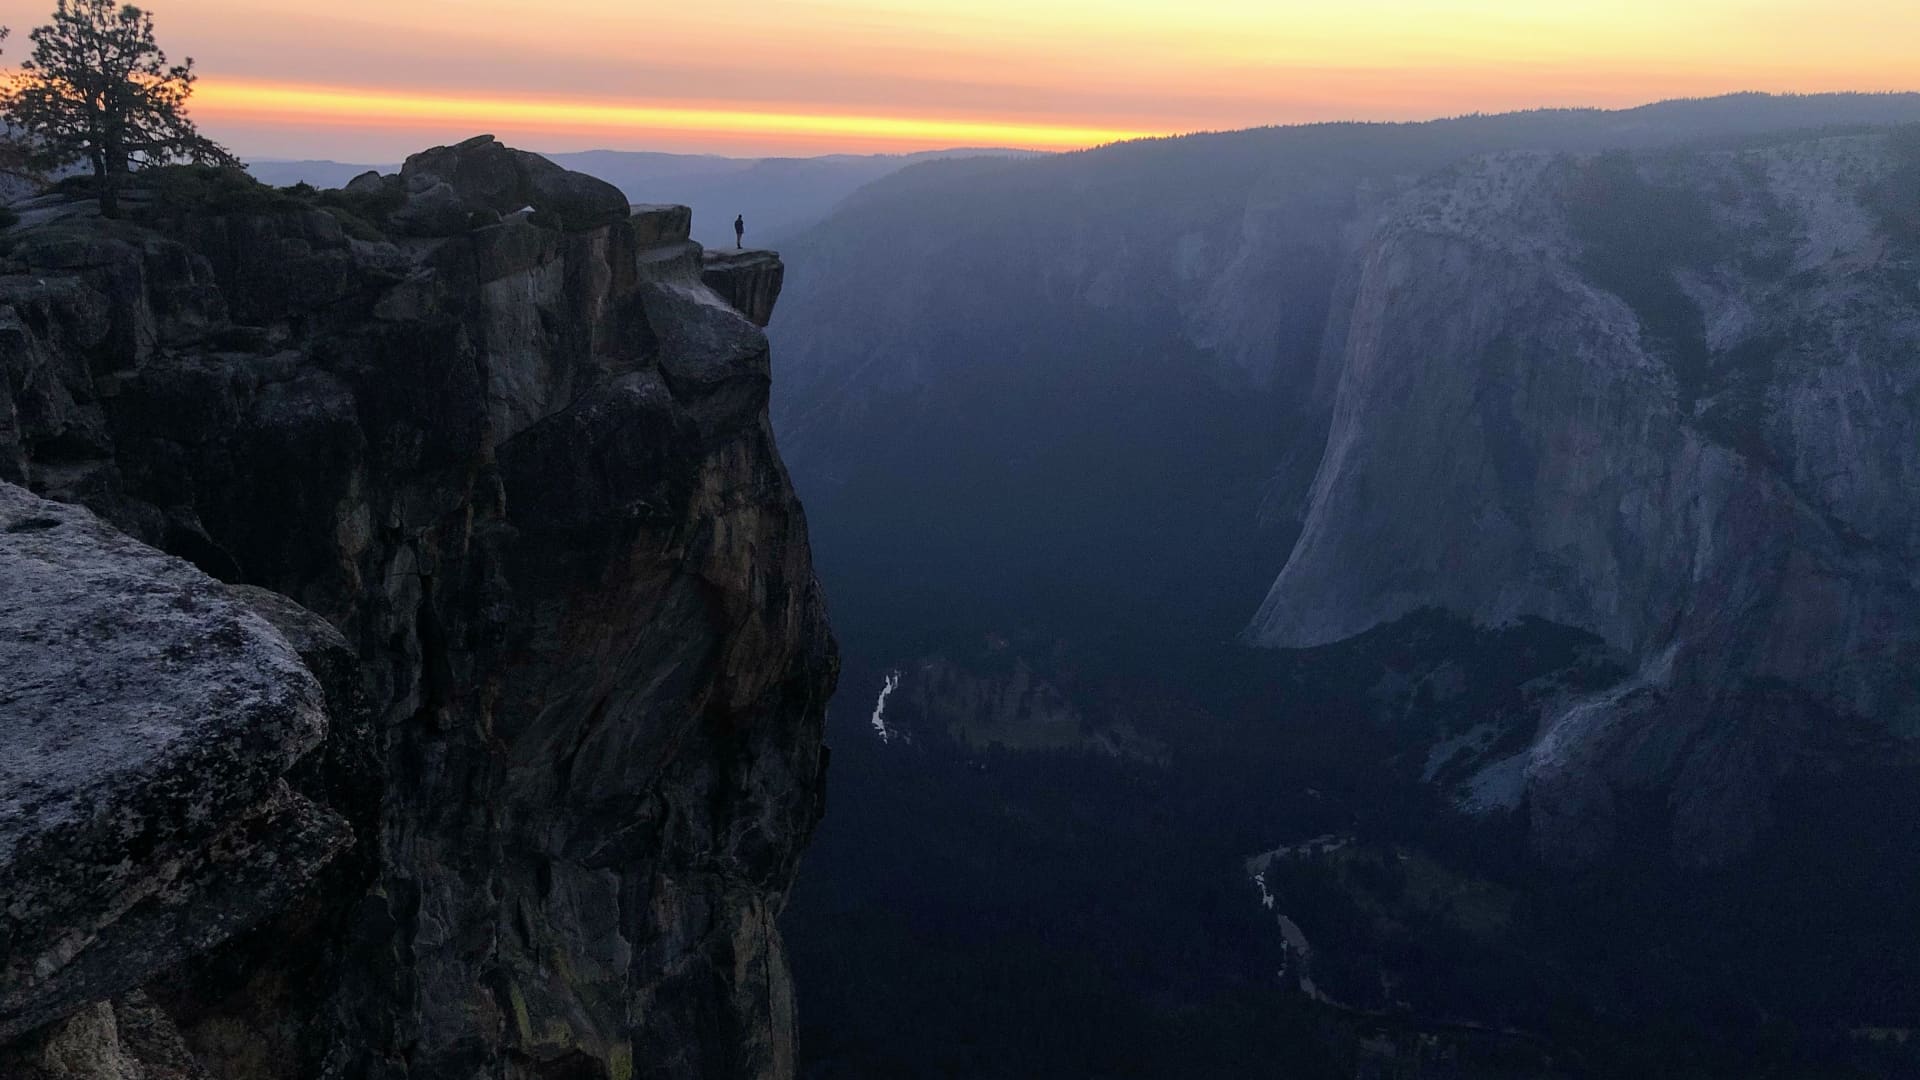 Sunset from Taft Point in Yosemite National Park, California.